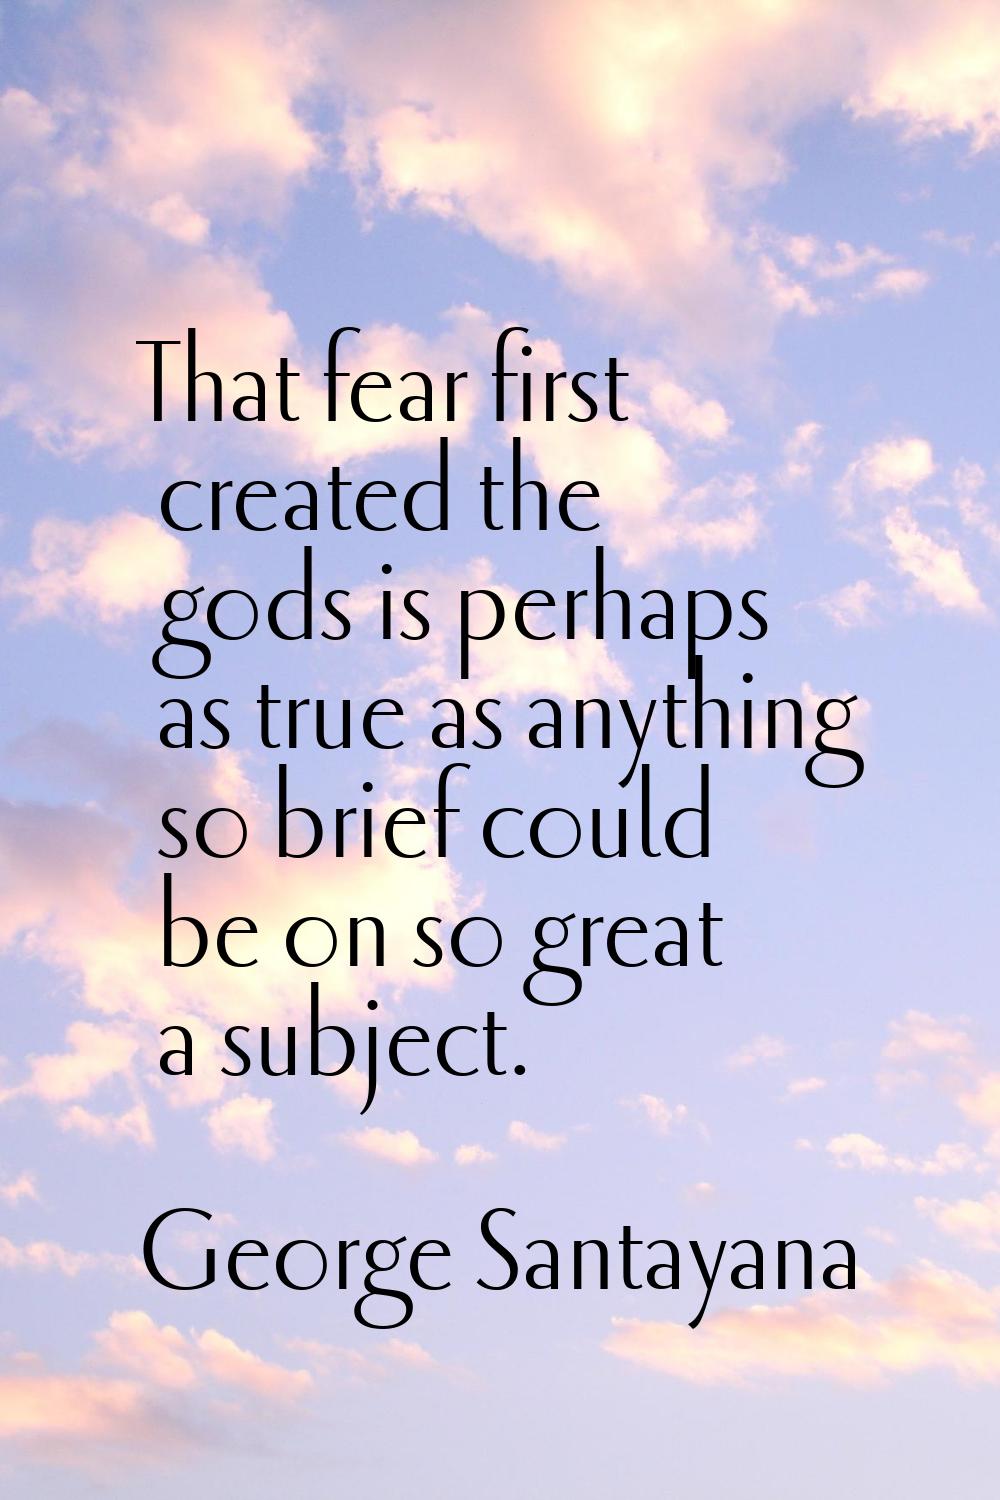 That fear first created the gods is perhaps as true as anything so brief could be on so great a sub